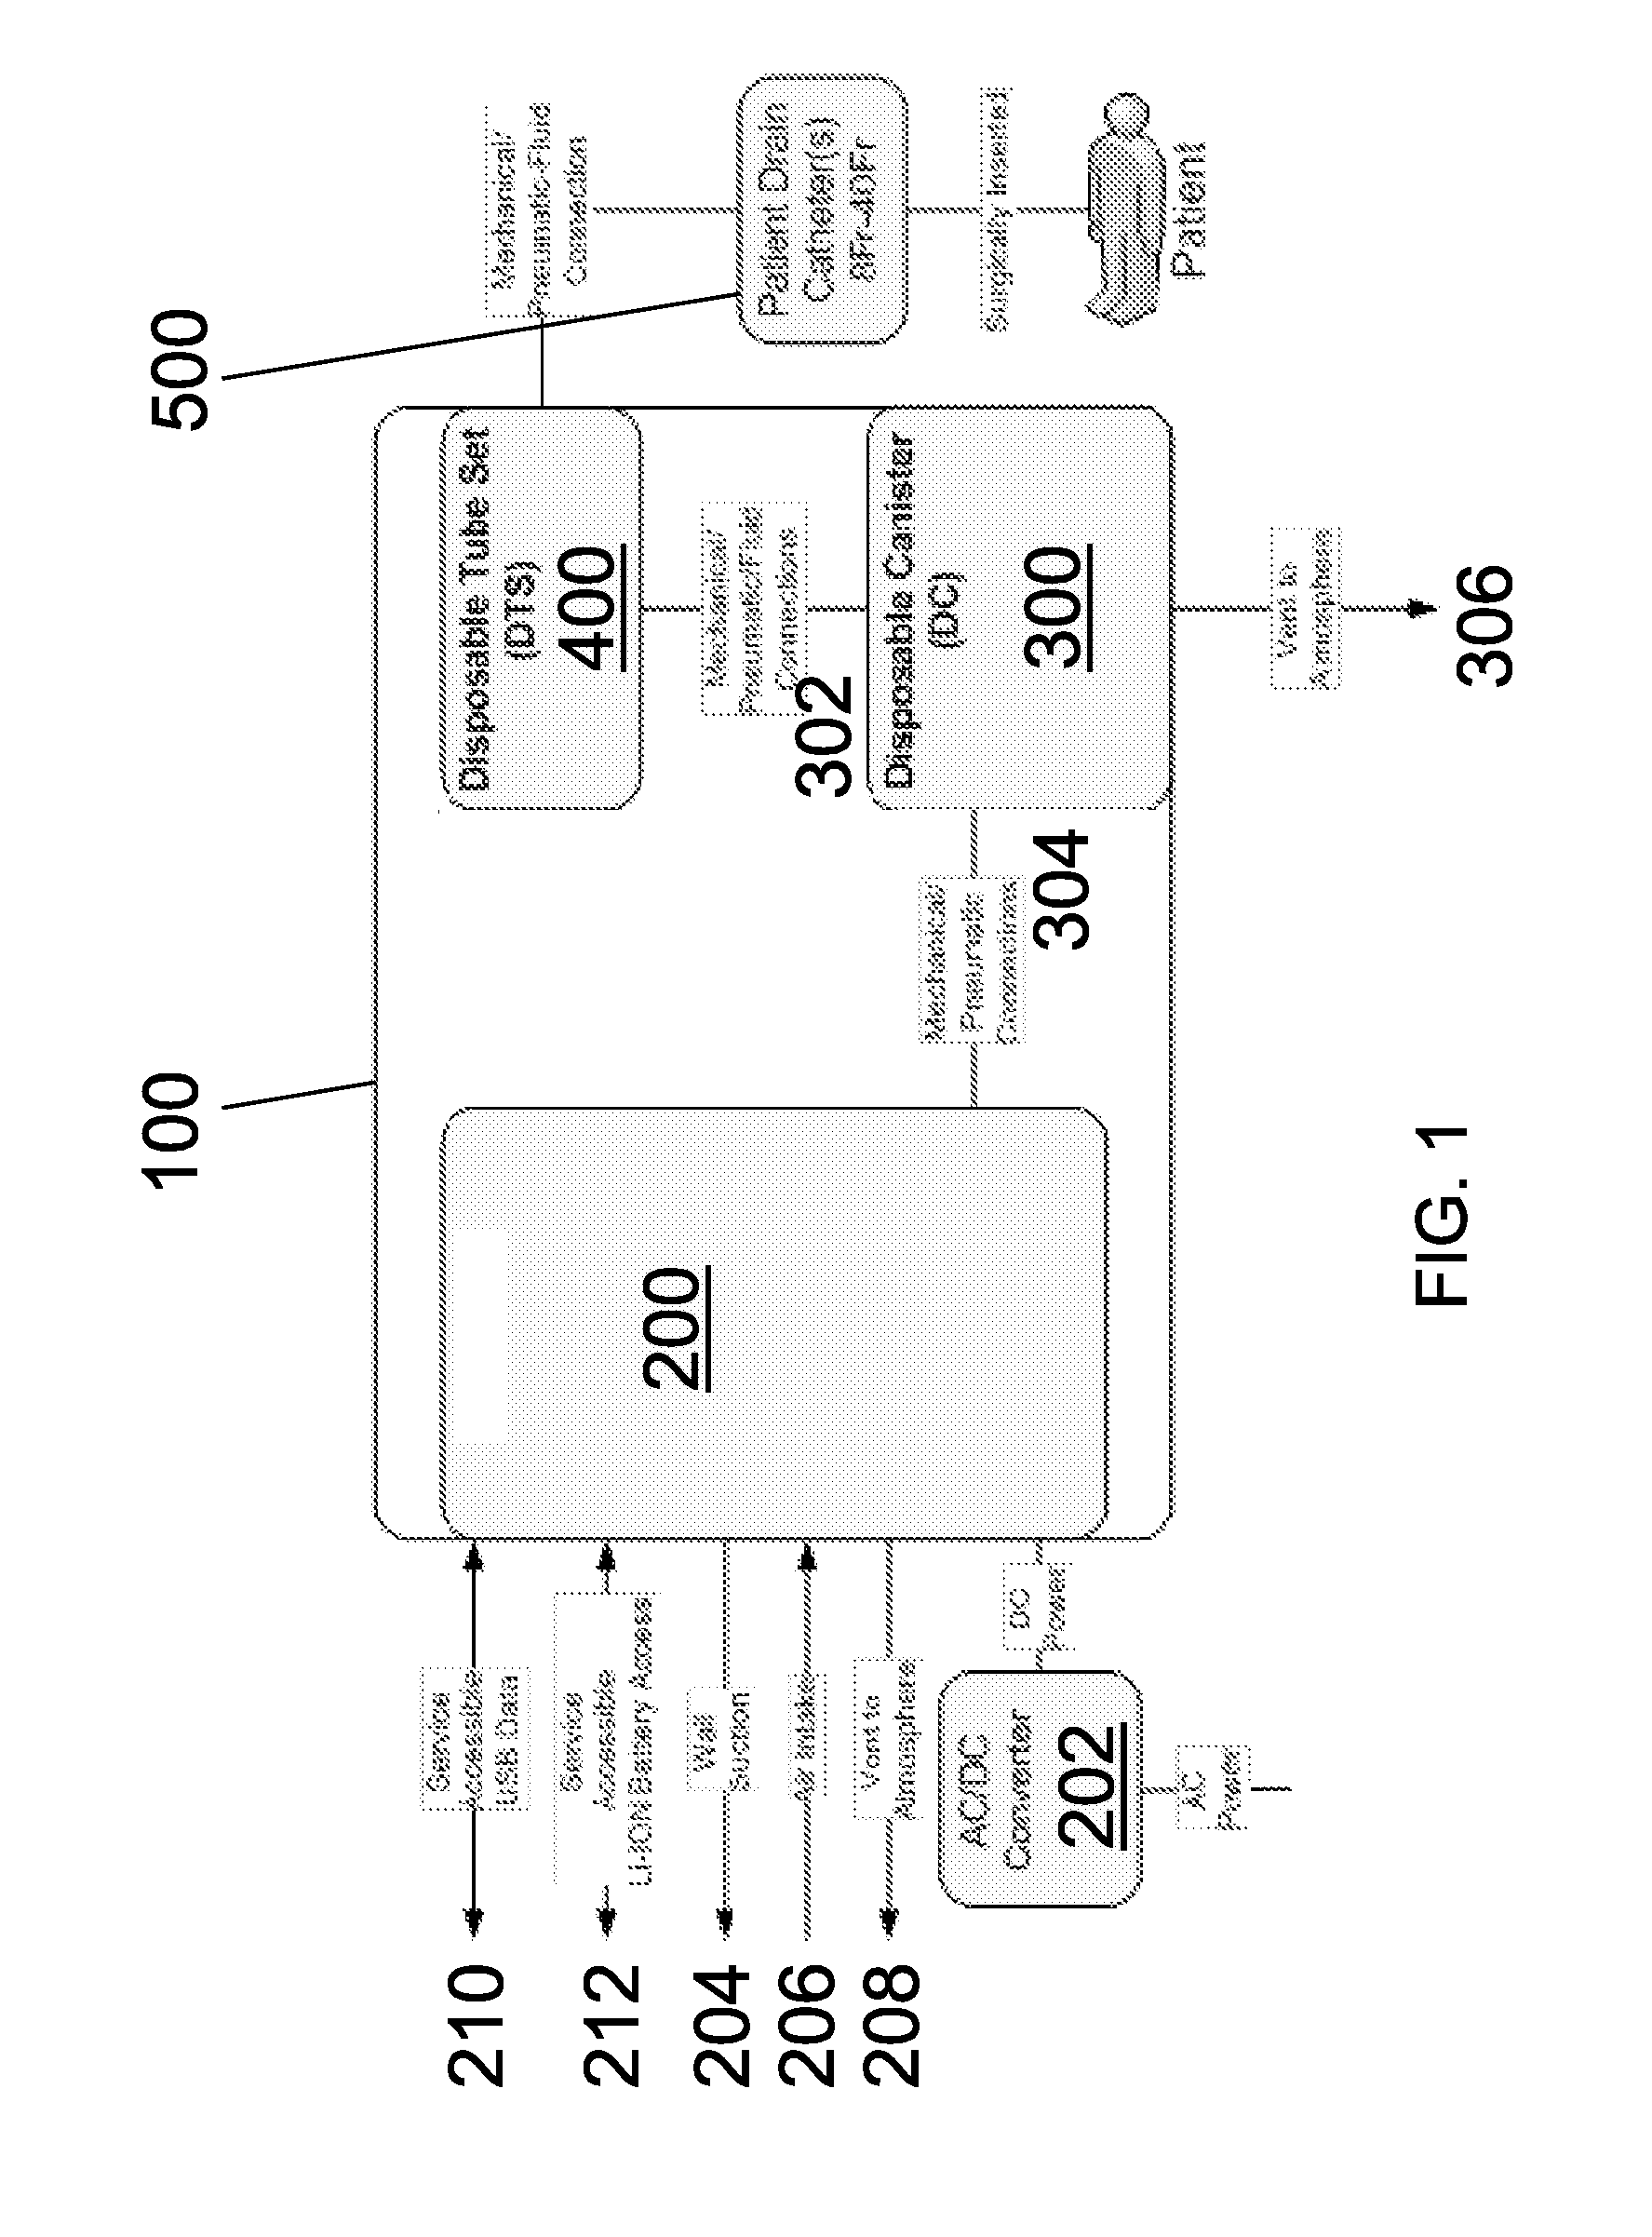 Chest drainage systems and methods